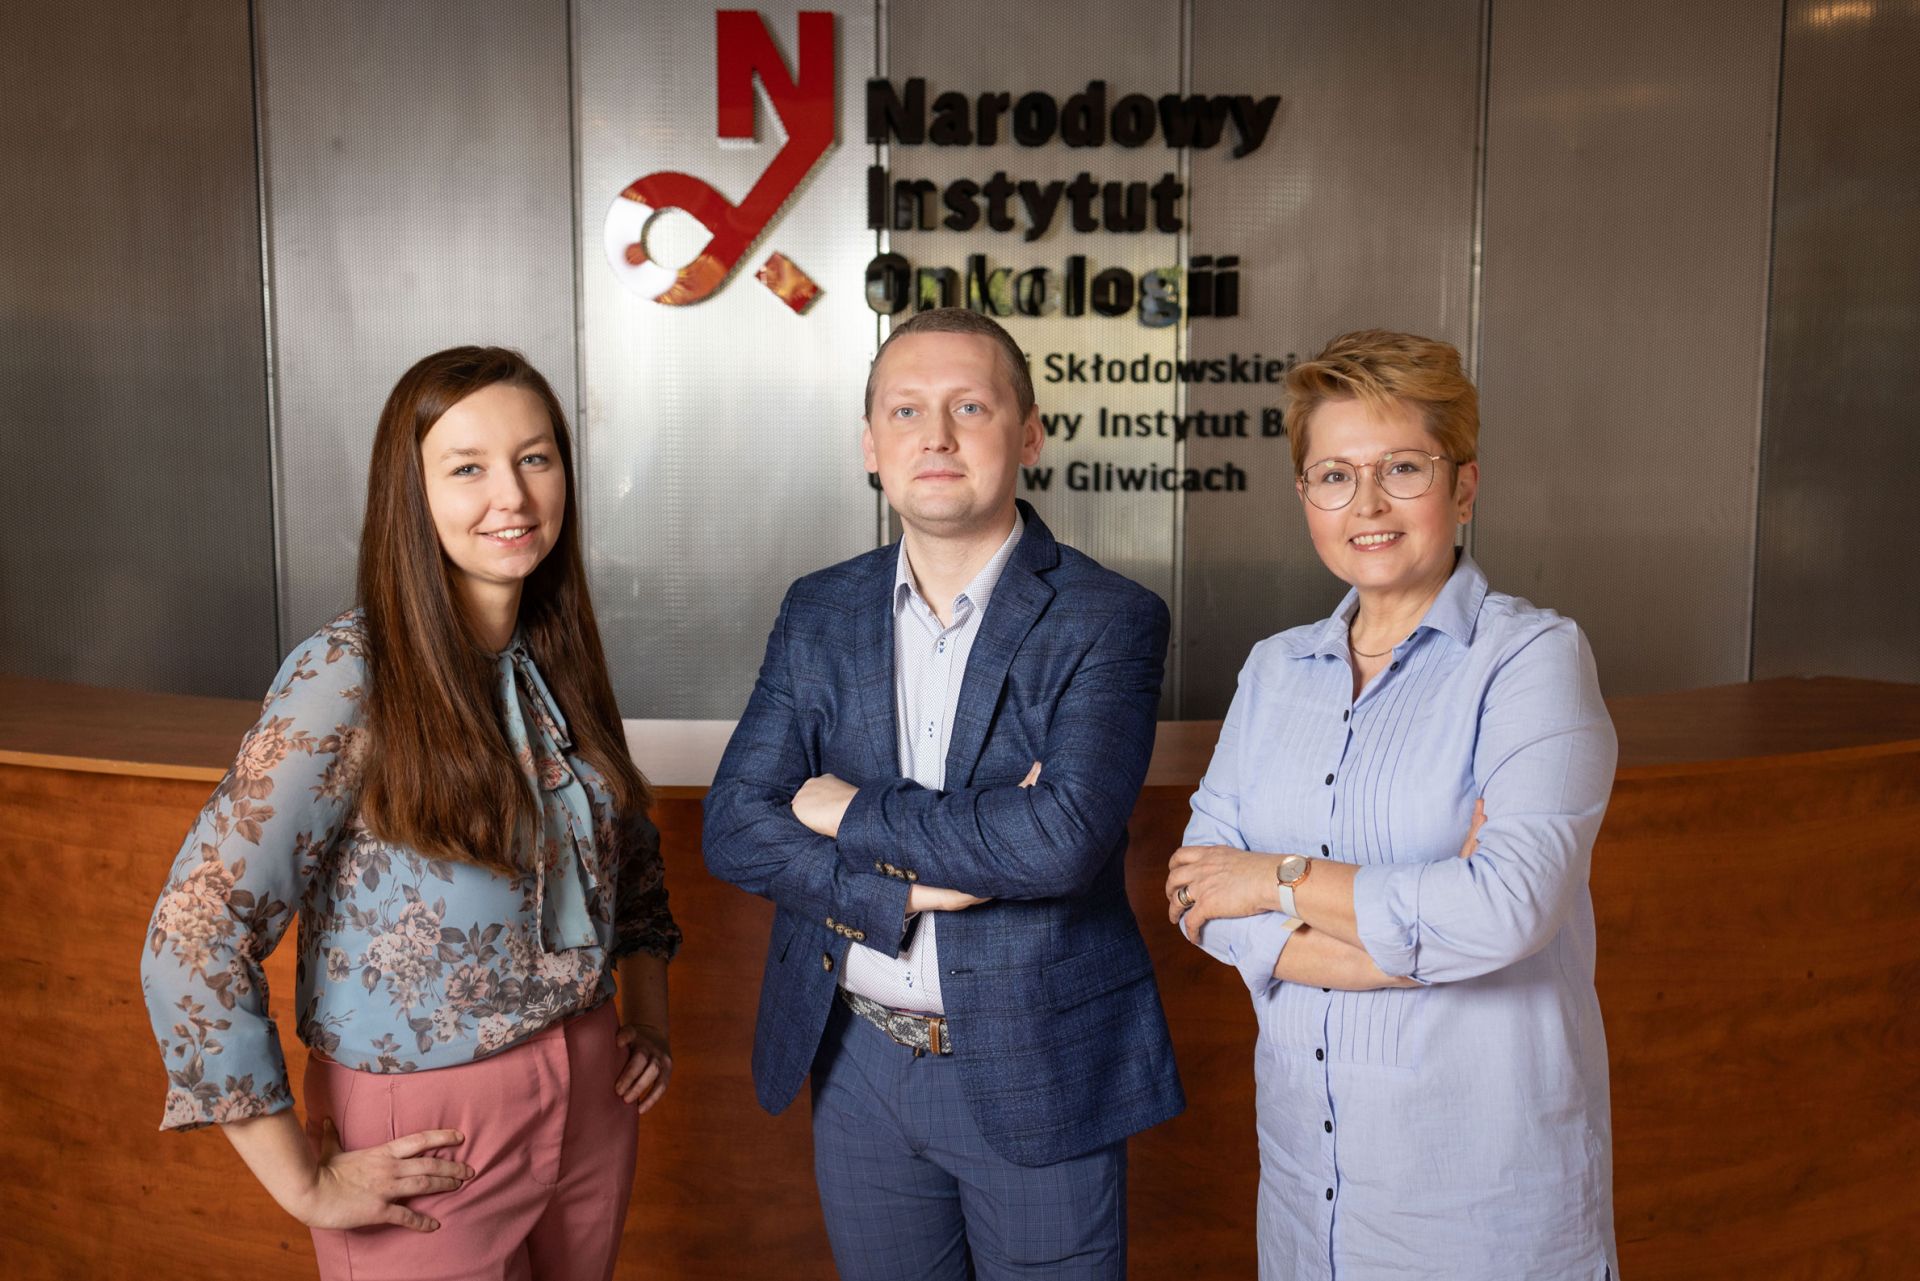 Dr Karol Andrzej Jelonek with his team: Katarzyna Morowiec (on the left) and Lucyna Ponge (on the right), photo by Michał Łepecki